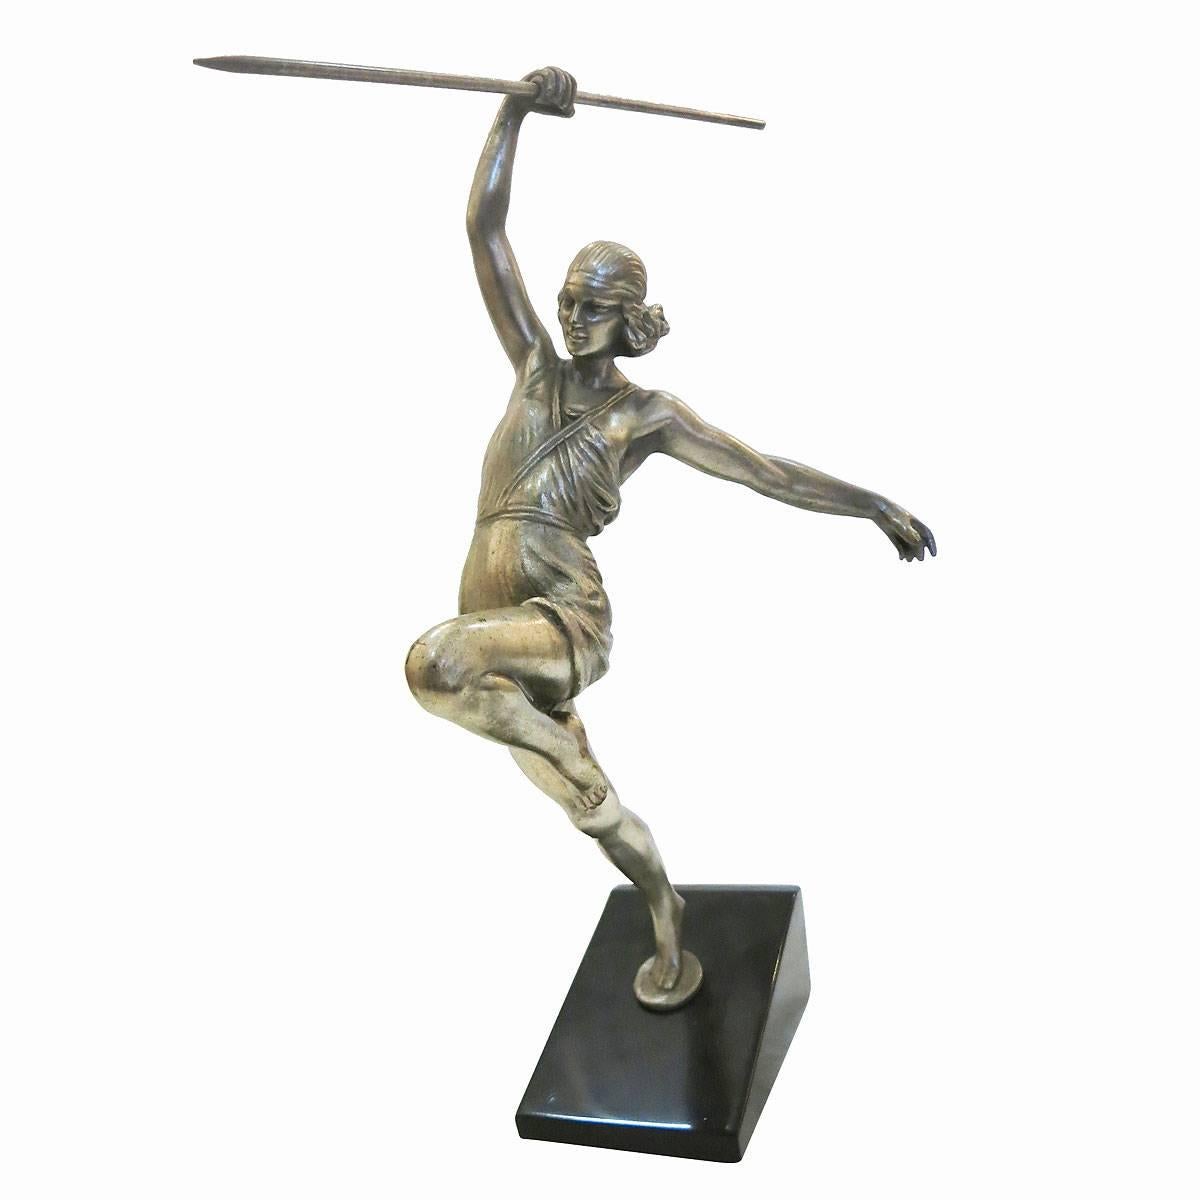 Art Deco style solid bronze casting with an antique silver finish of a female Roman warrior, in mid attack, throwing a spear. The piece is mounted on a mirror polished black marble base. This high quality piece was reproduced from the original